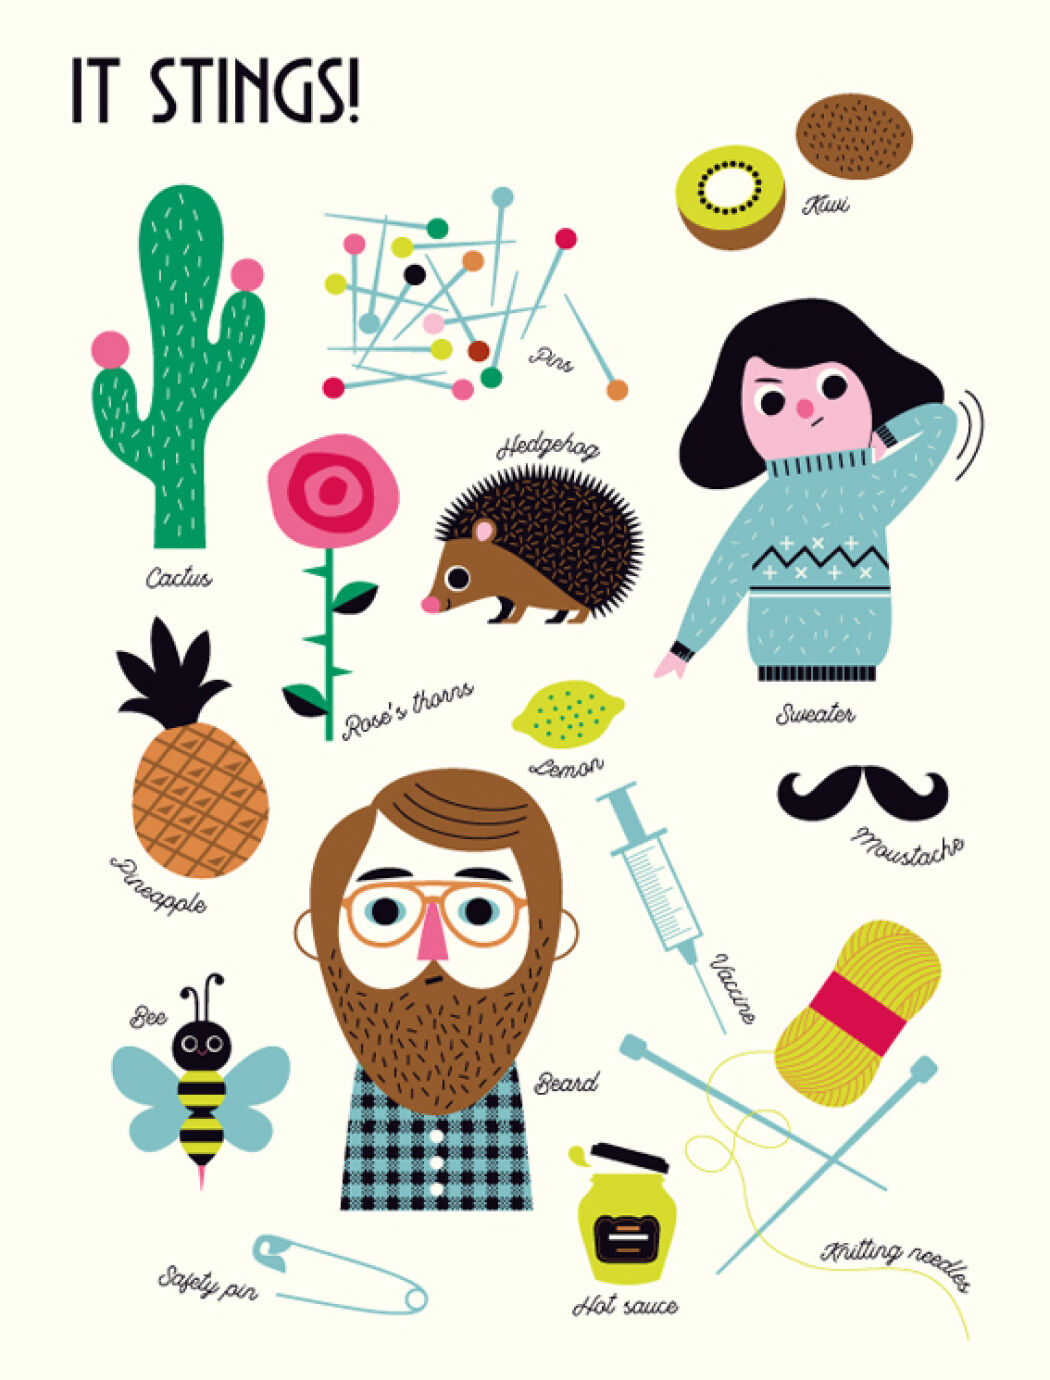 Colorful drawings and character design by Ingela P Arrhenius.